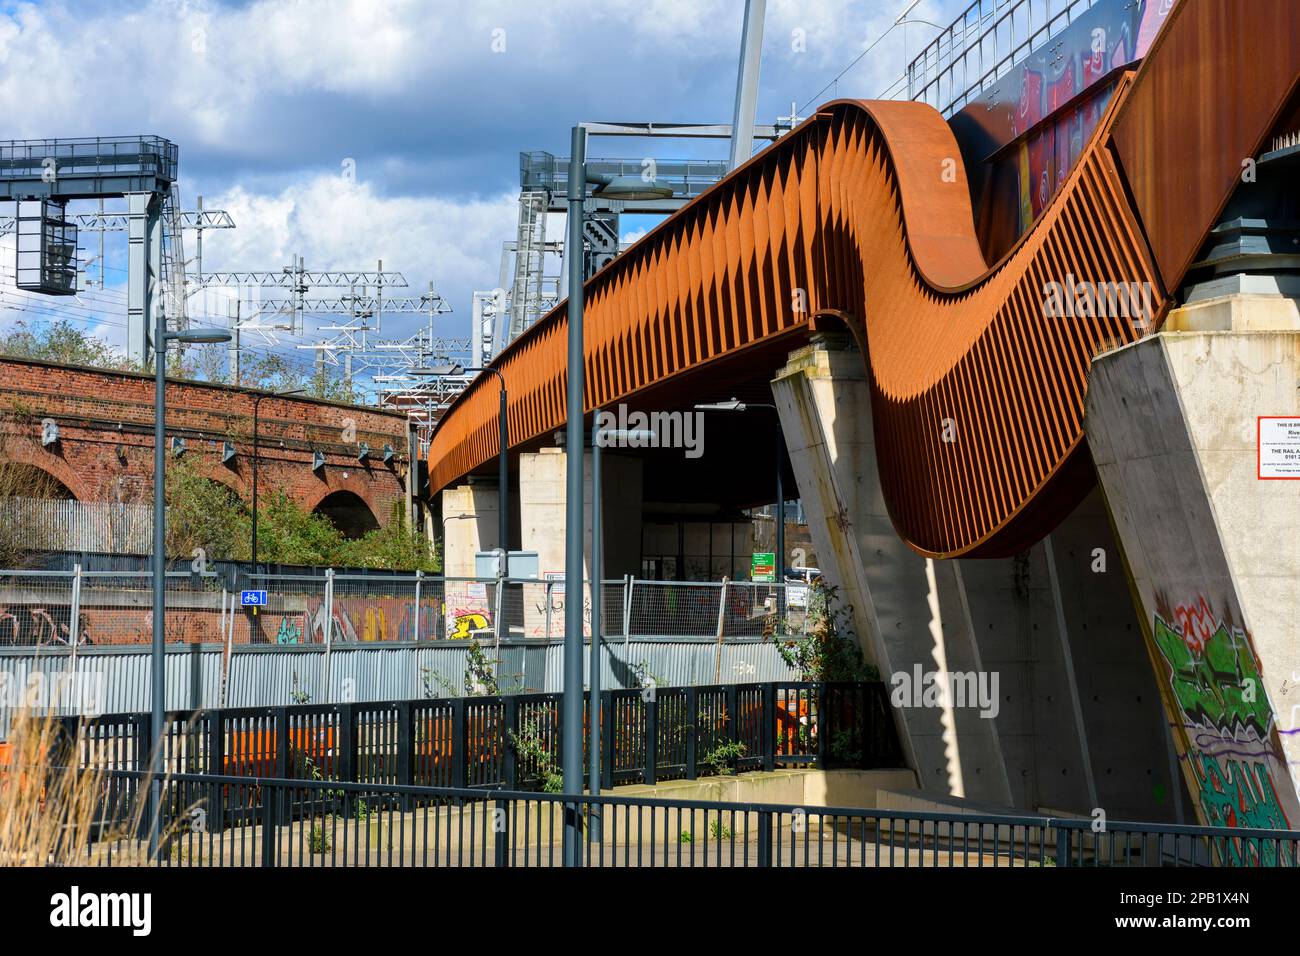 Le pont ferroviaire Ordsall Chord au-dessus de Trinity Way, Salford, Manchester, Angleterre, Royaume-Uni Banque D'Images